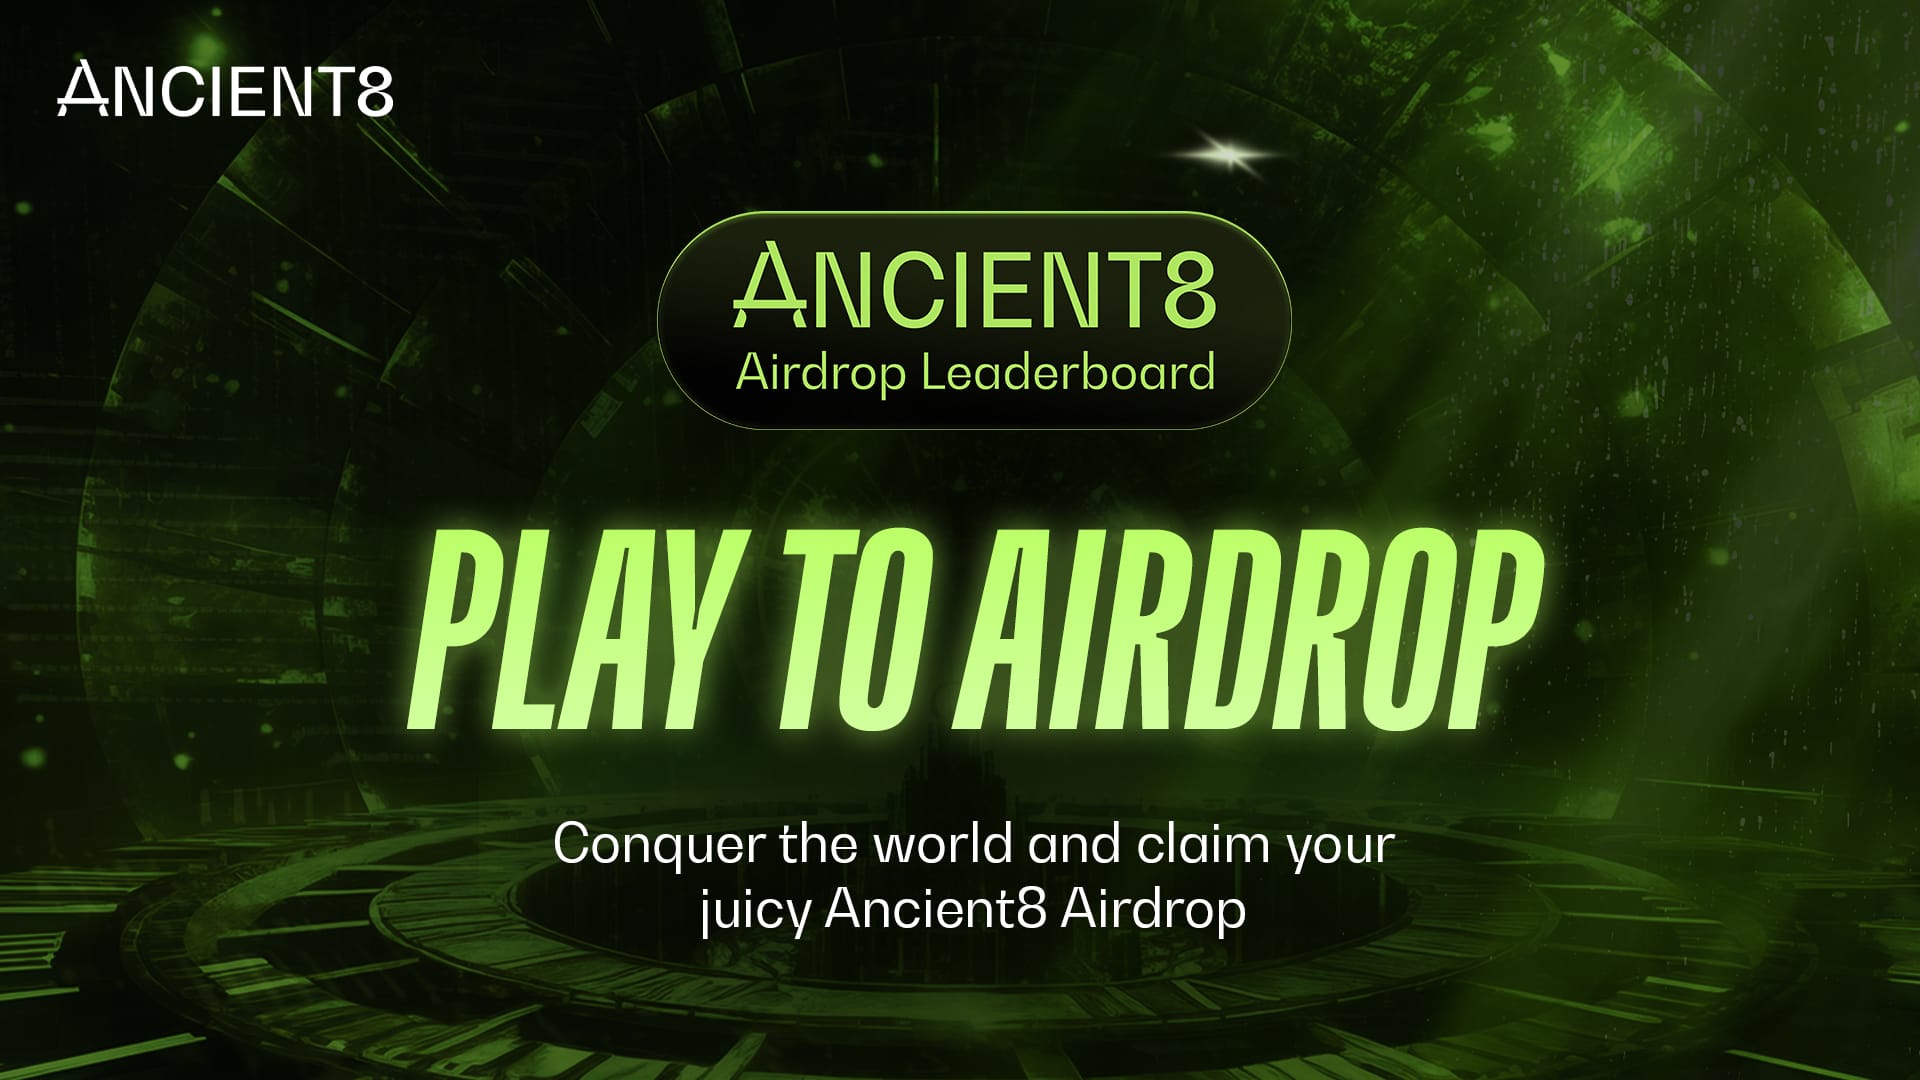 Ancient8 Airdrop Leaderboard - Play To Airdrop Has Arrived!